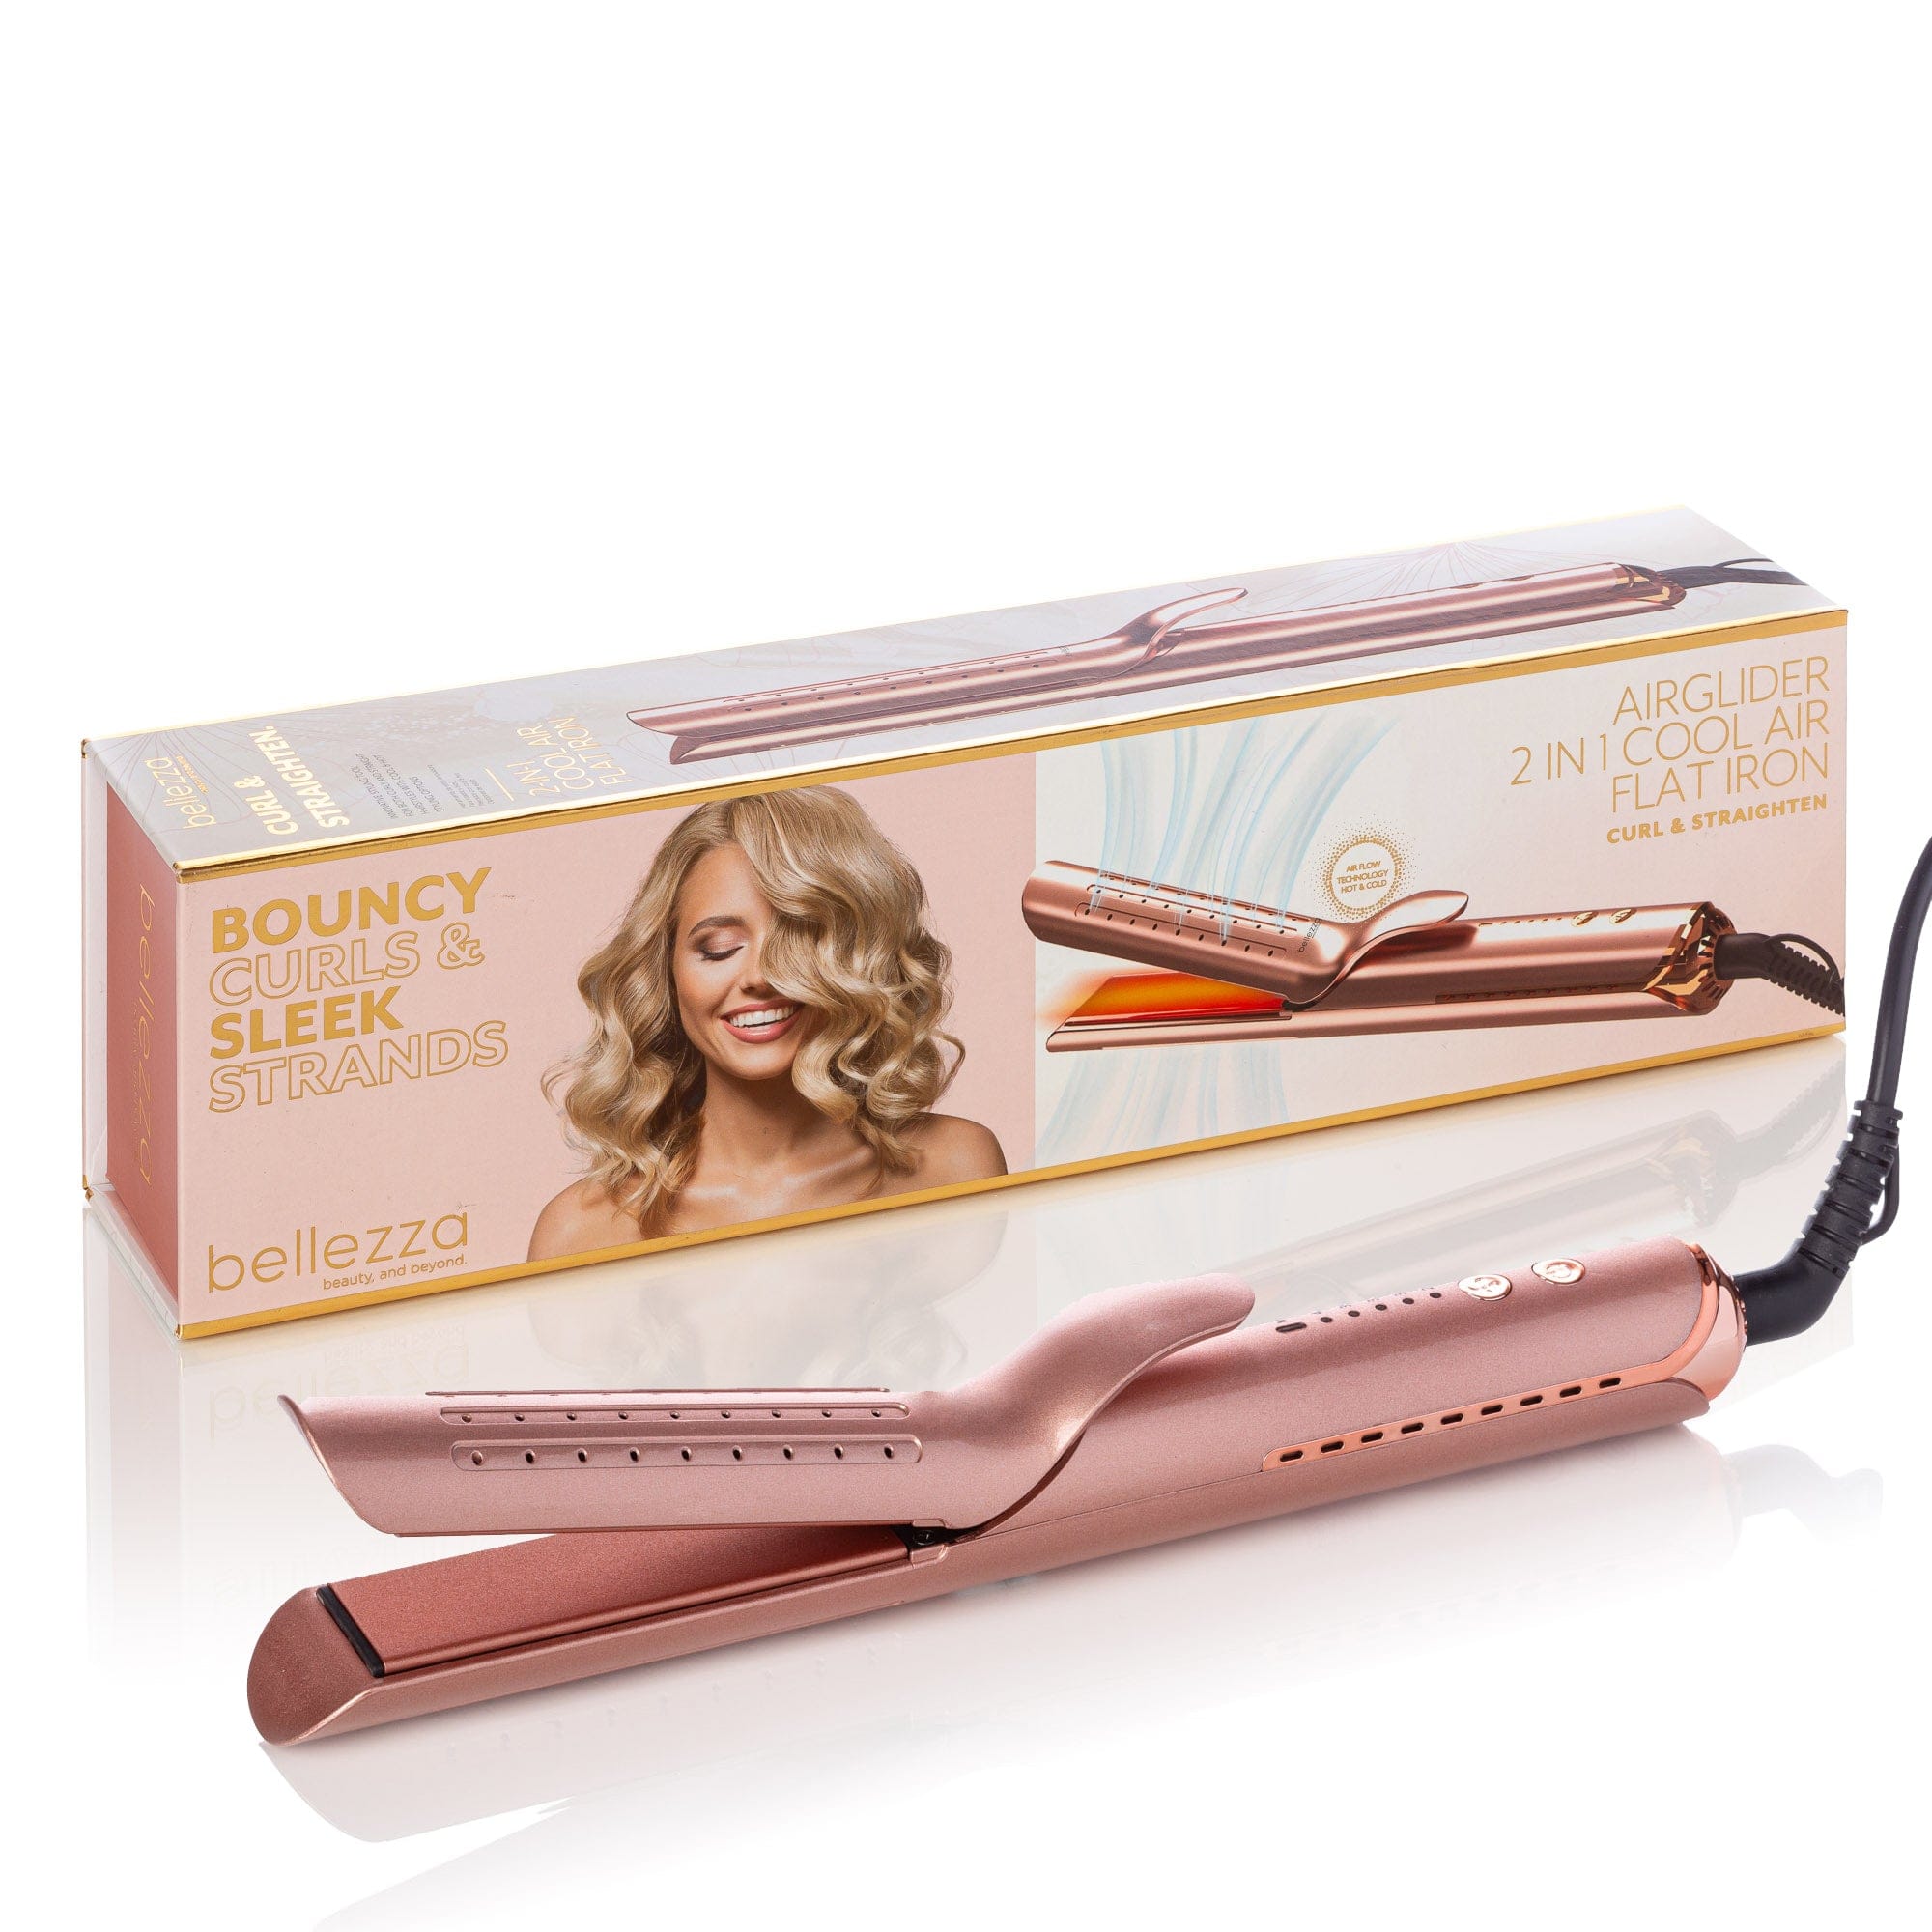 Cortex Beauty Rose Gold AirGlider | 2-in-1 Cool Air Flat Iron/curler